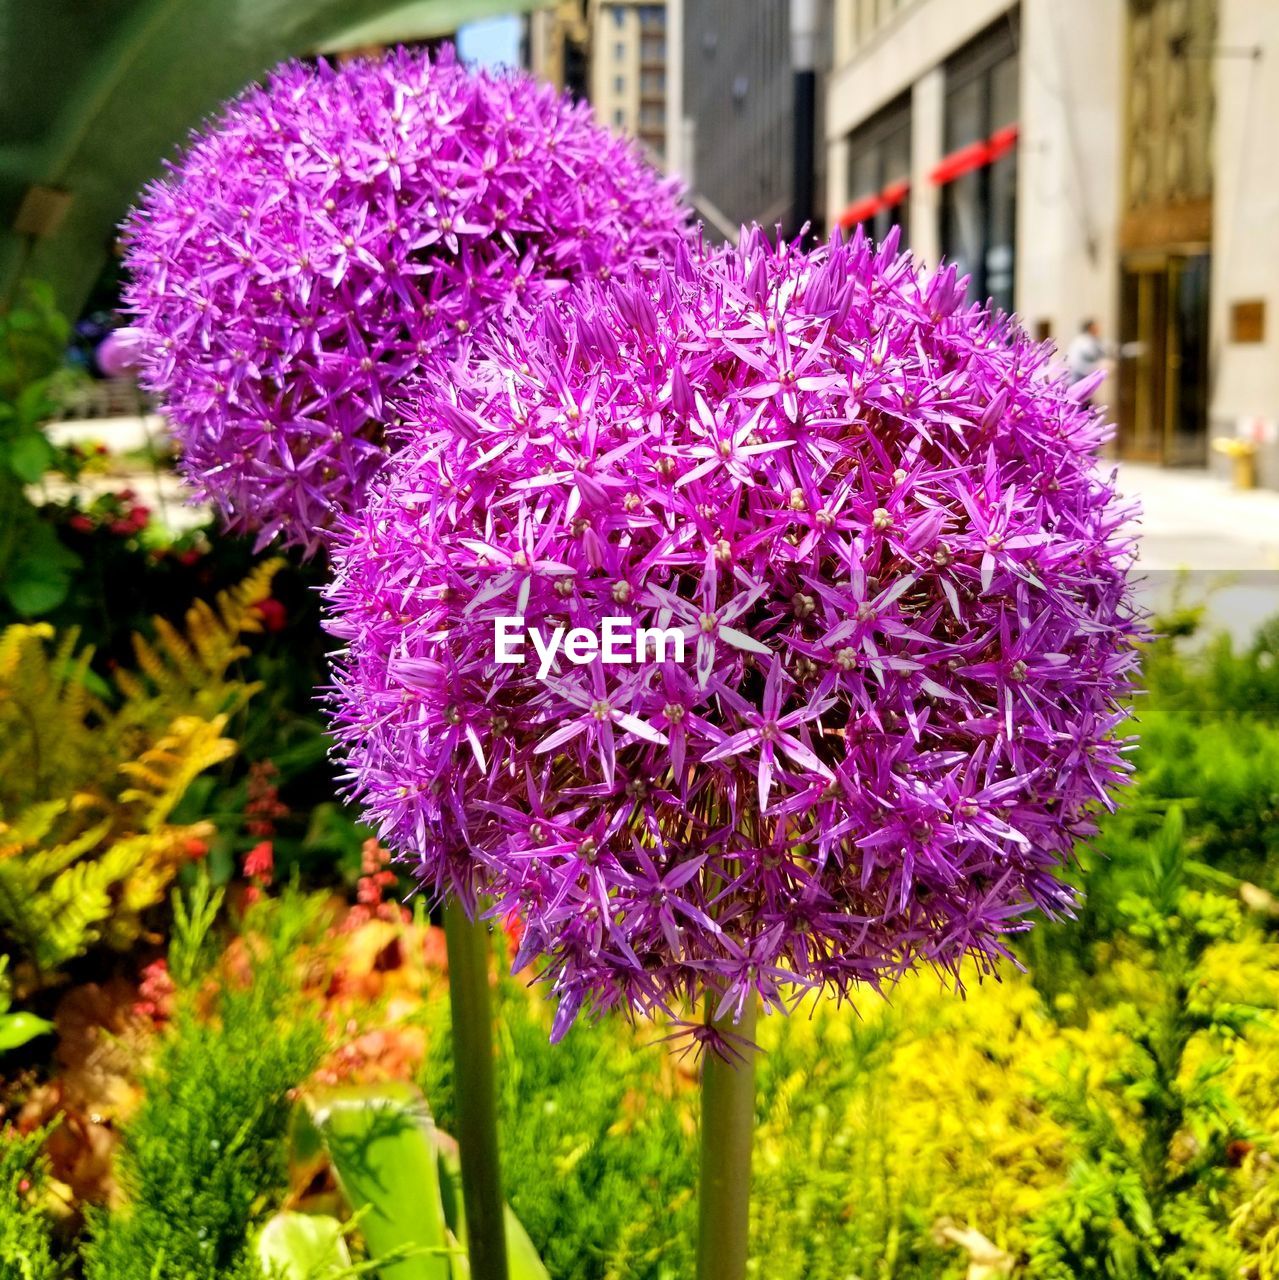 CLOSE-UP OF FRESH PURPLE FLOWERS BLOOMING IN PLANT